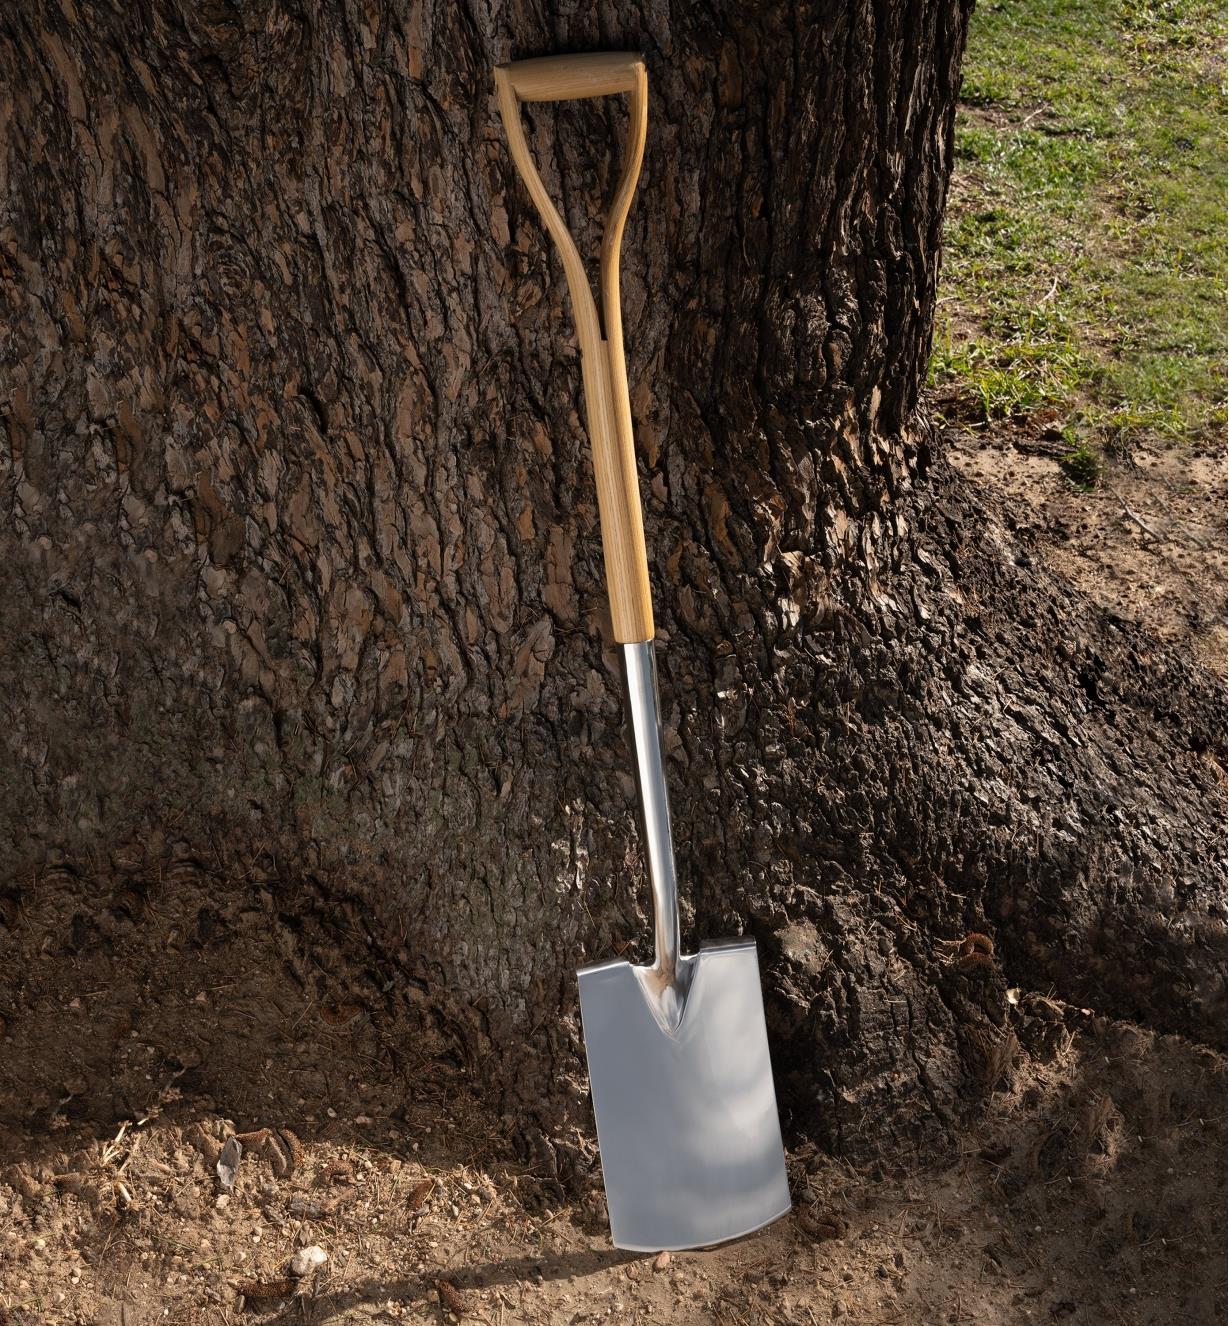 The digging spade leaning up against a tree